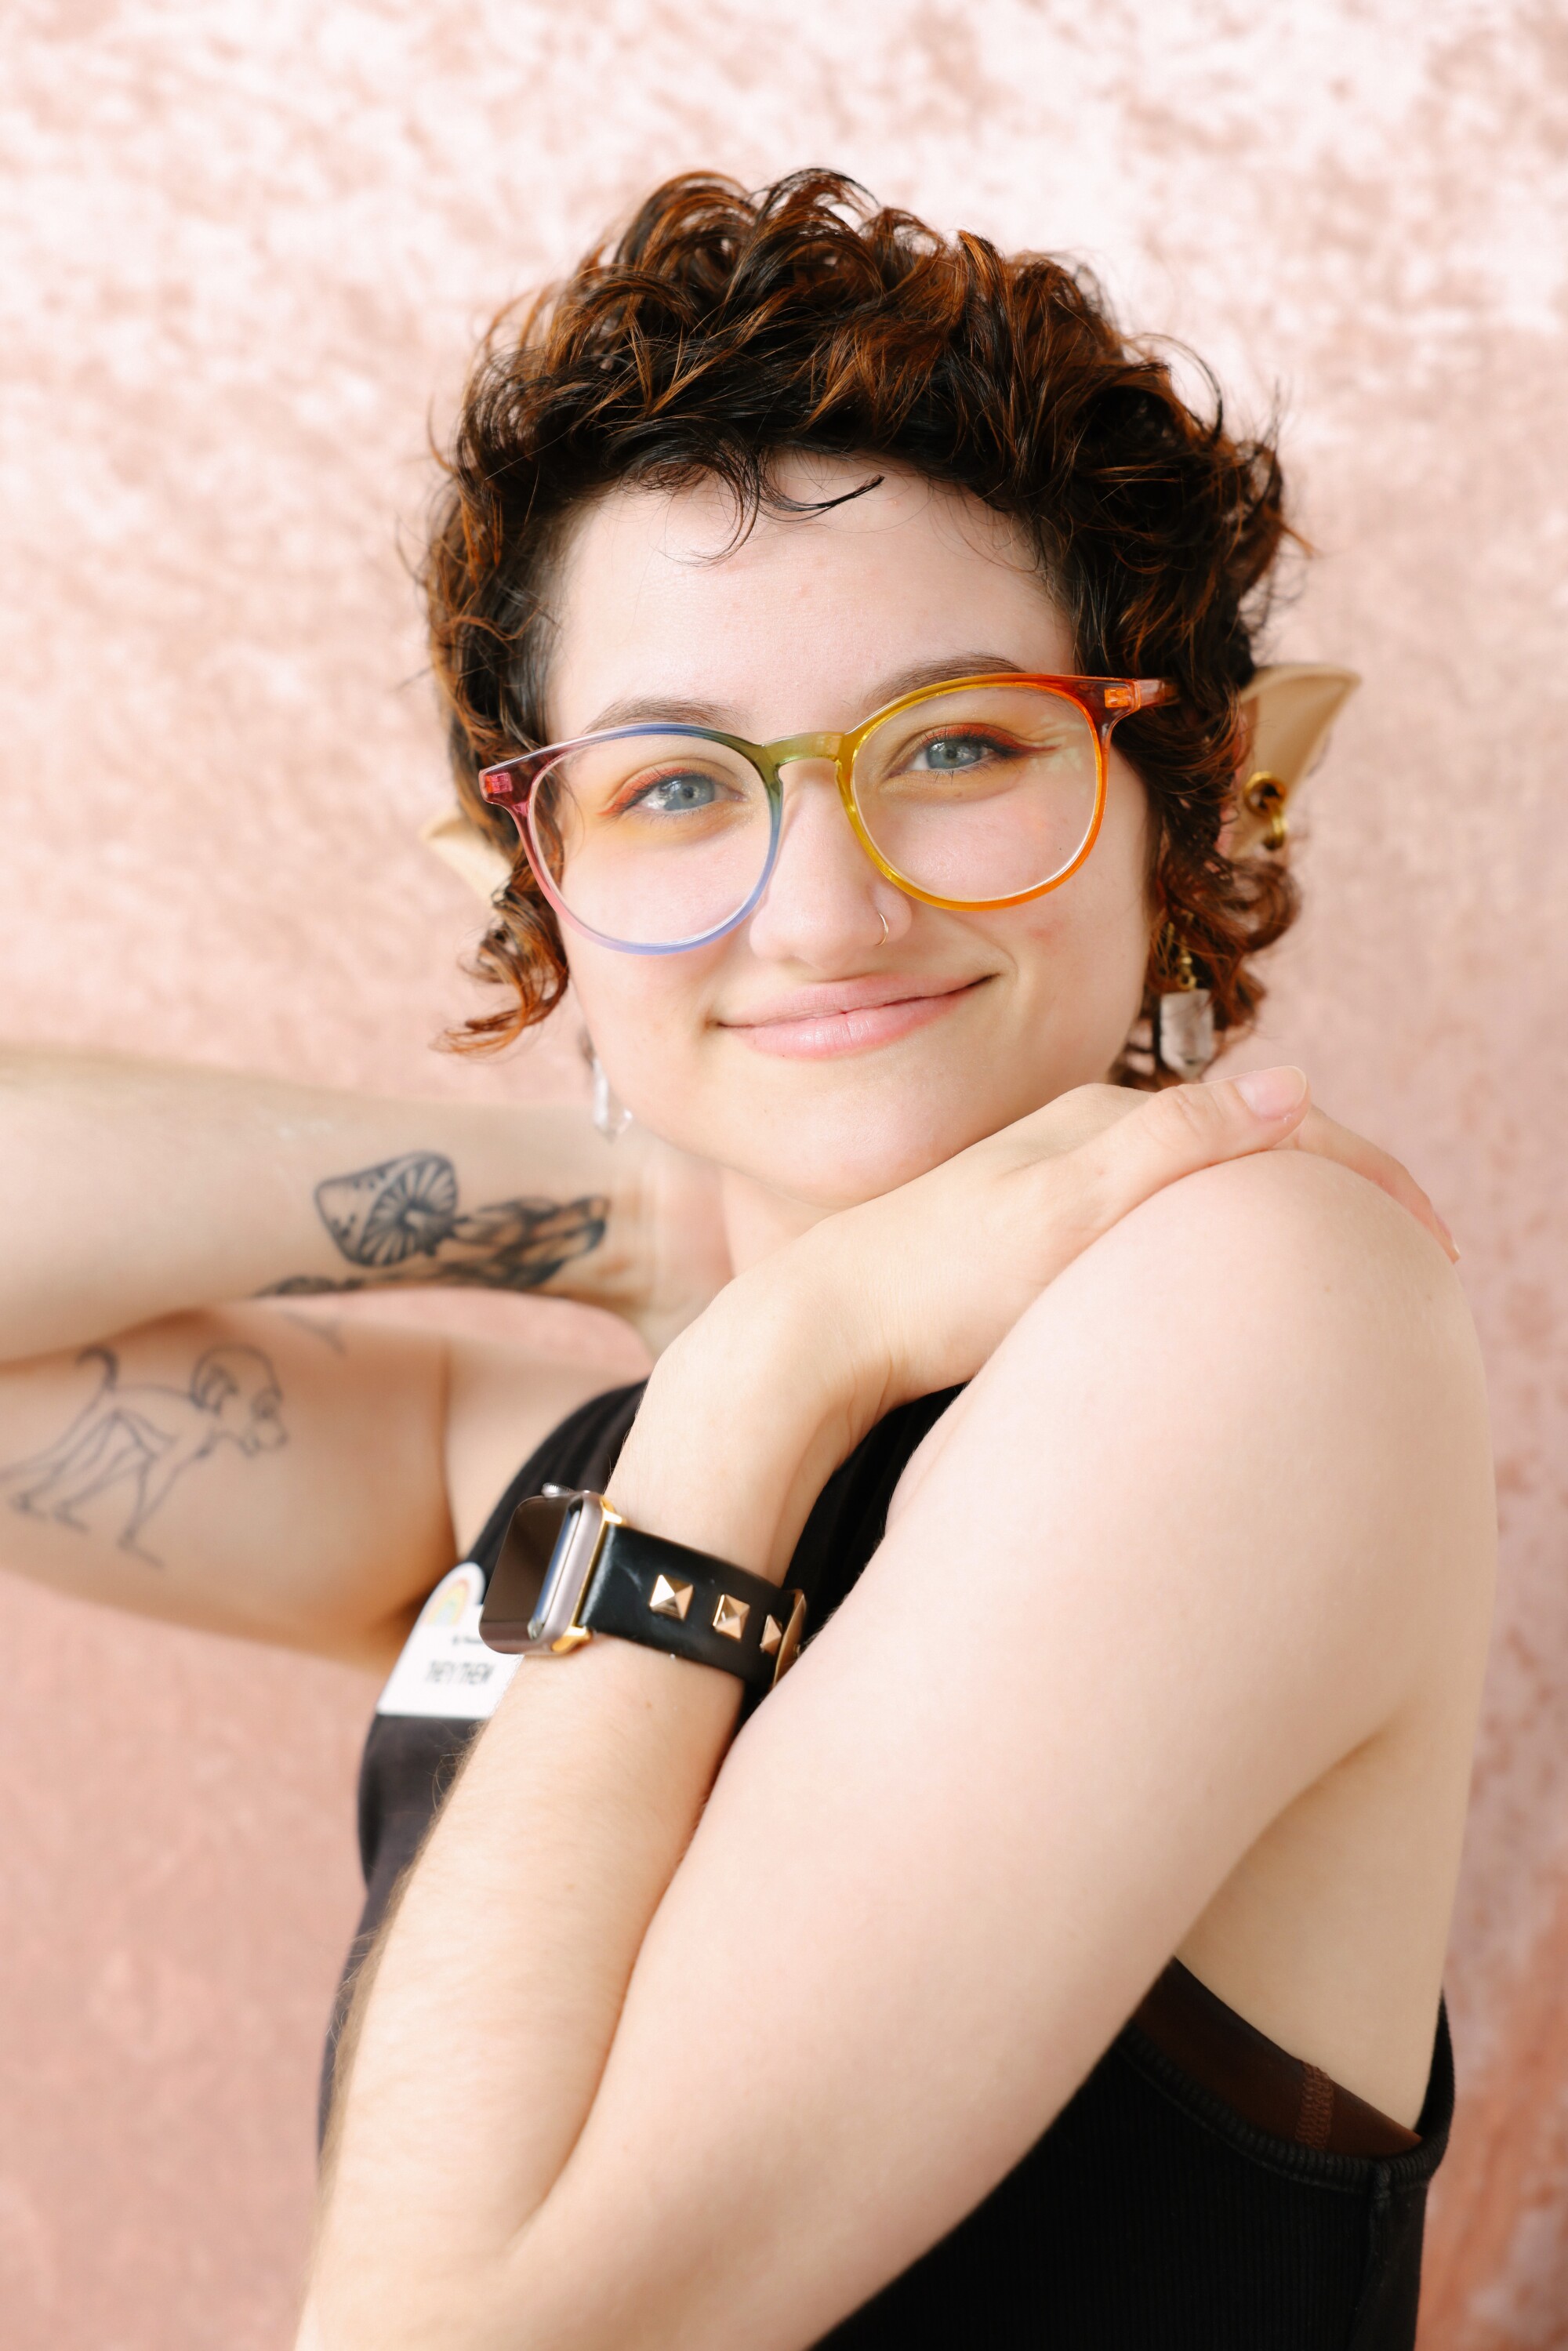 Individuals with rainbow glasses, elf ears and short hair pose for portraits